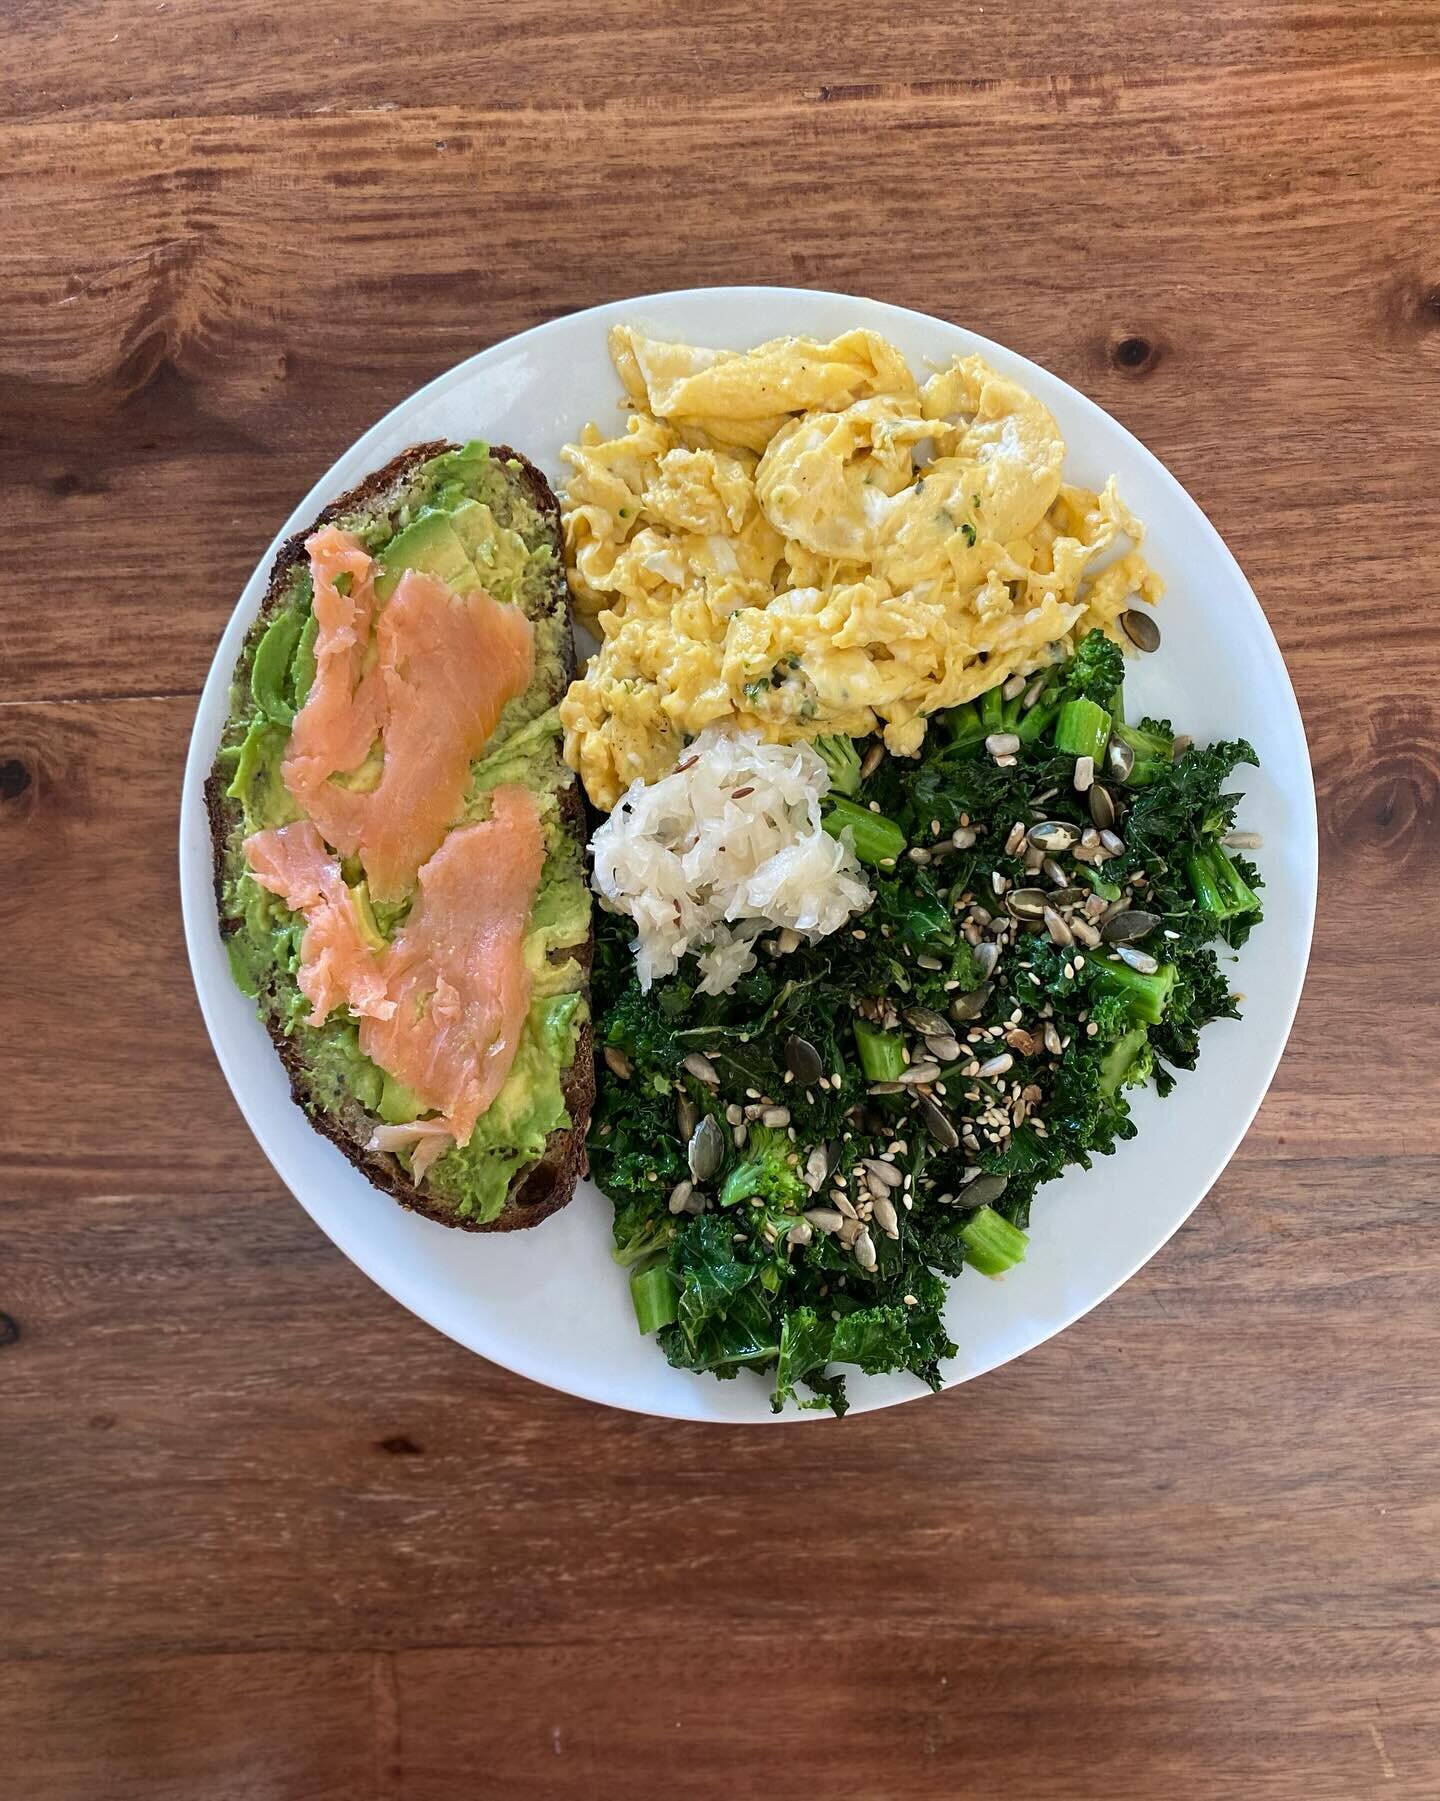 Nutritious &ldquo;work from home lunches&rdquo; I&rsquo;ve been enjoying lately. All of them are well balanced with protein, natural fats, complex carbohydrates and lots of fibre - exactly what you need to keep your afternoon energy levels high. Whic